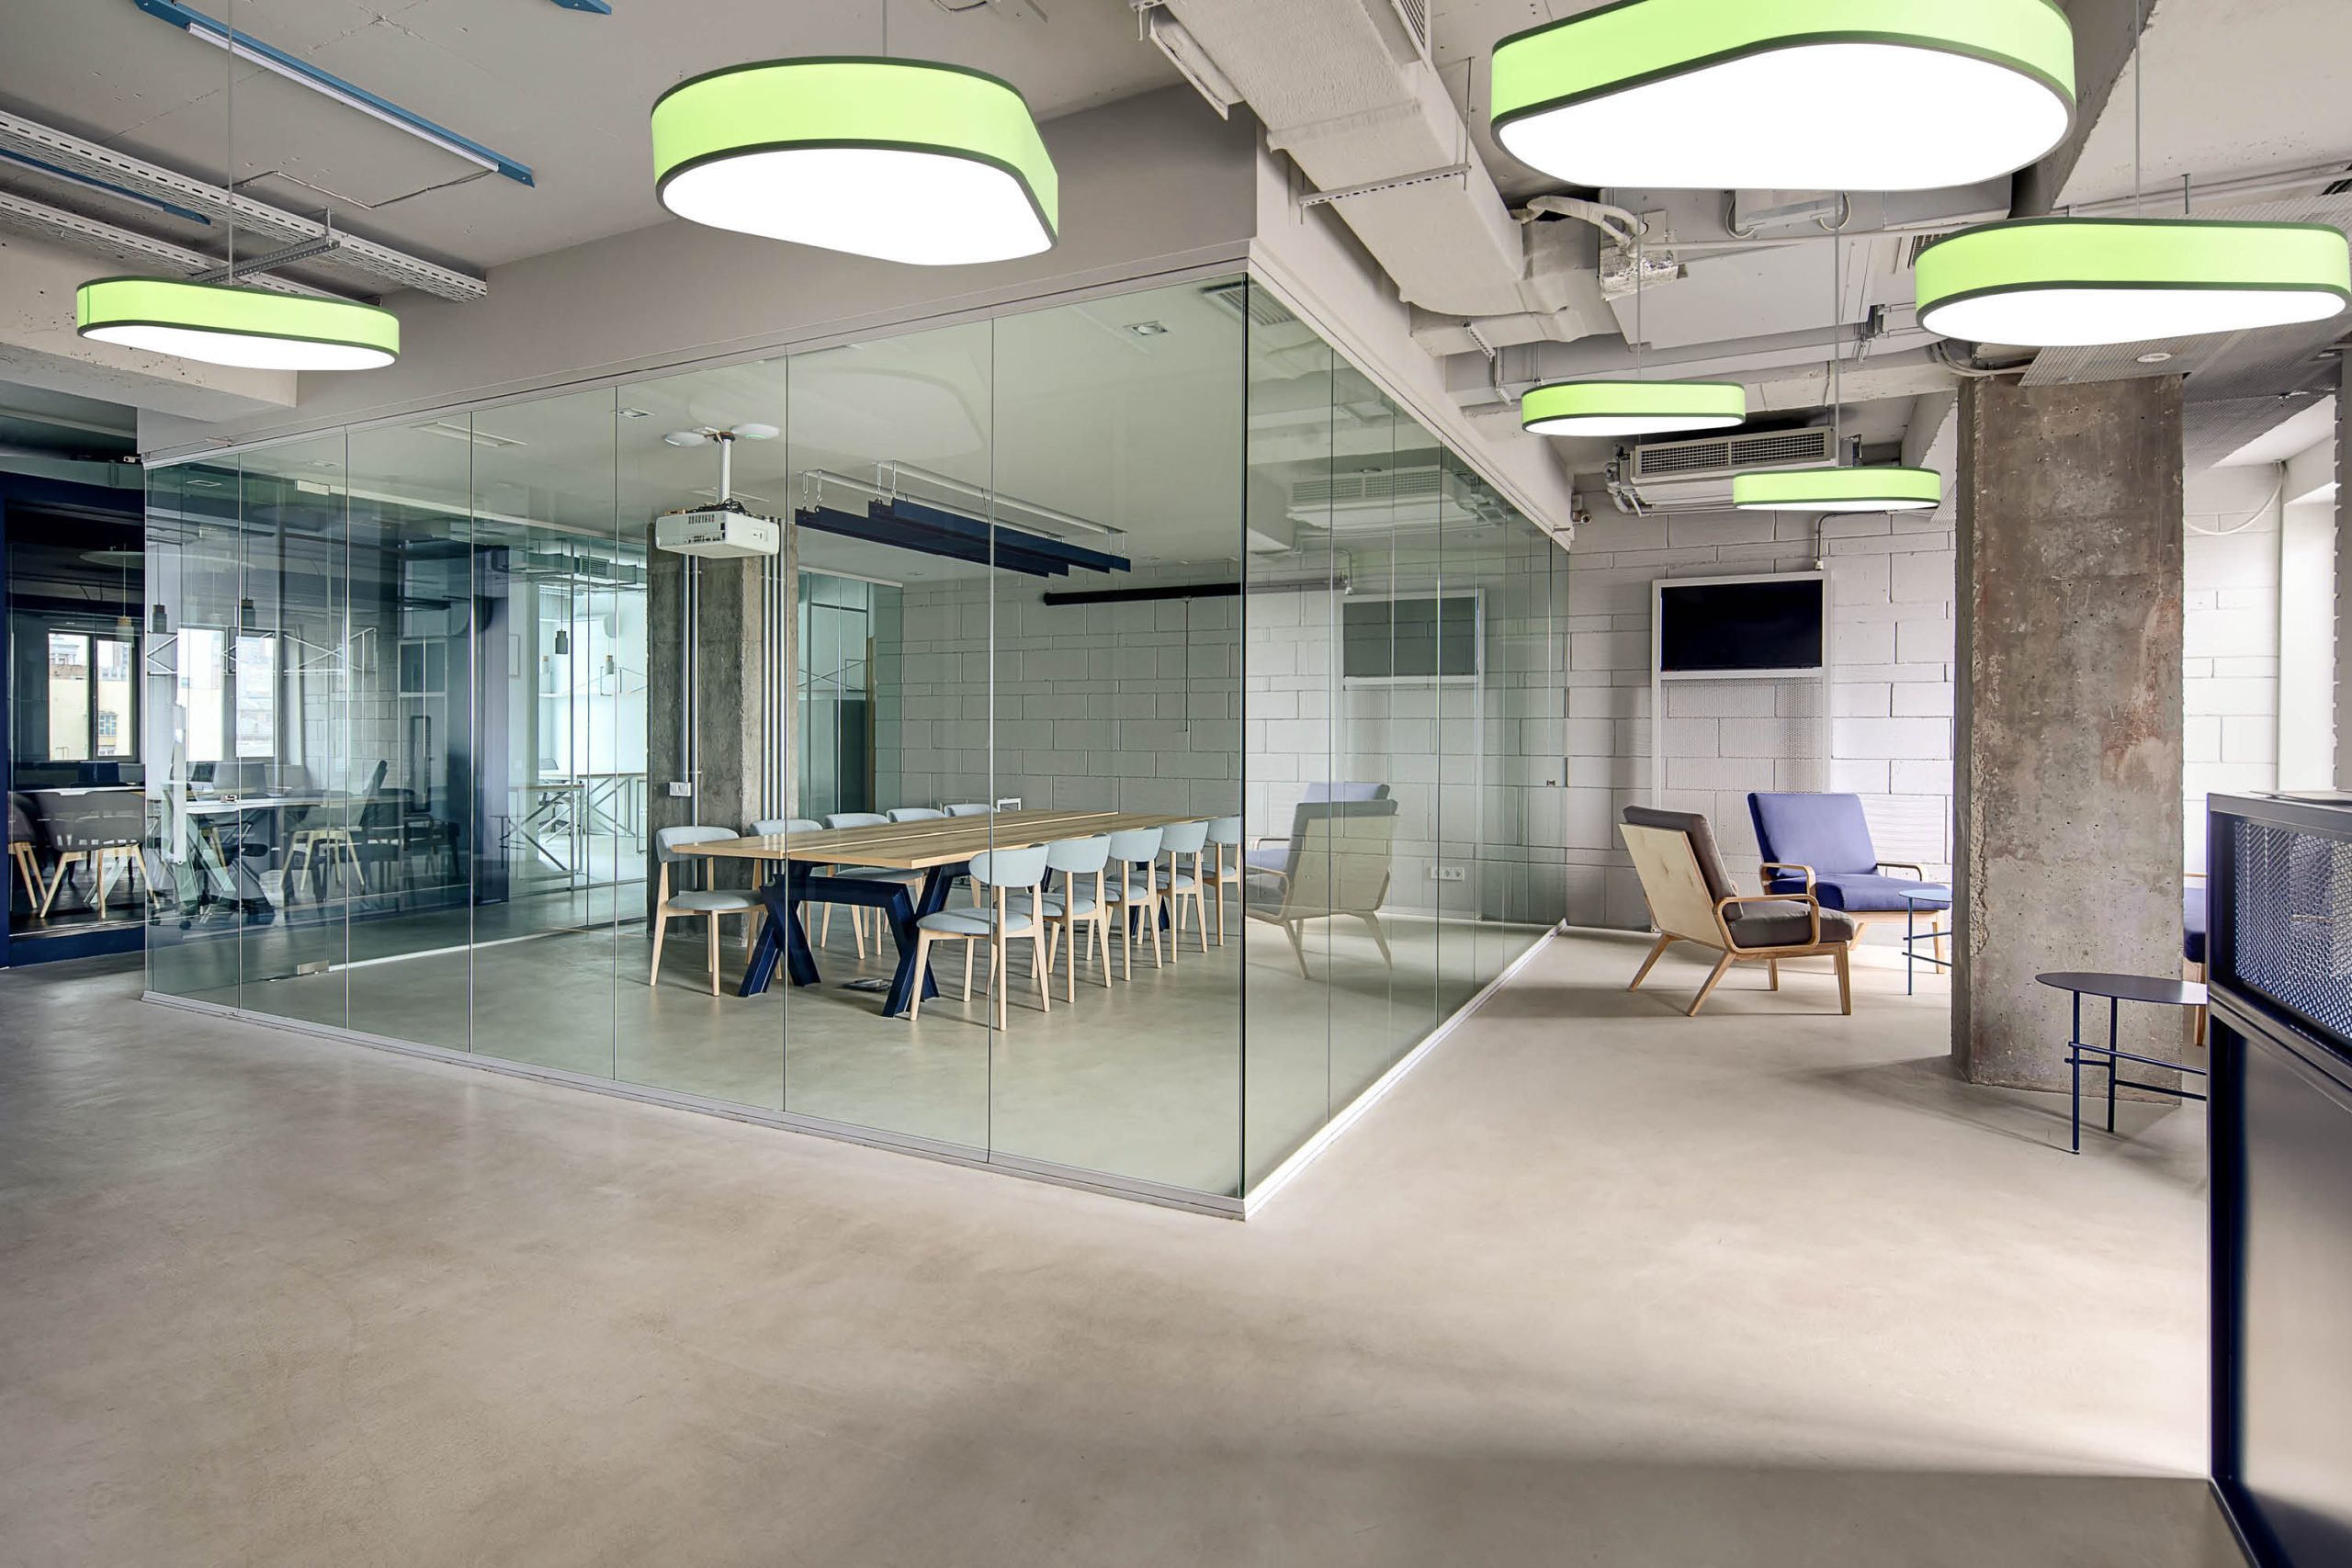 Nexus pendant lighting shown in a commercial office space.